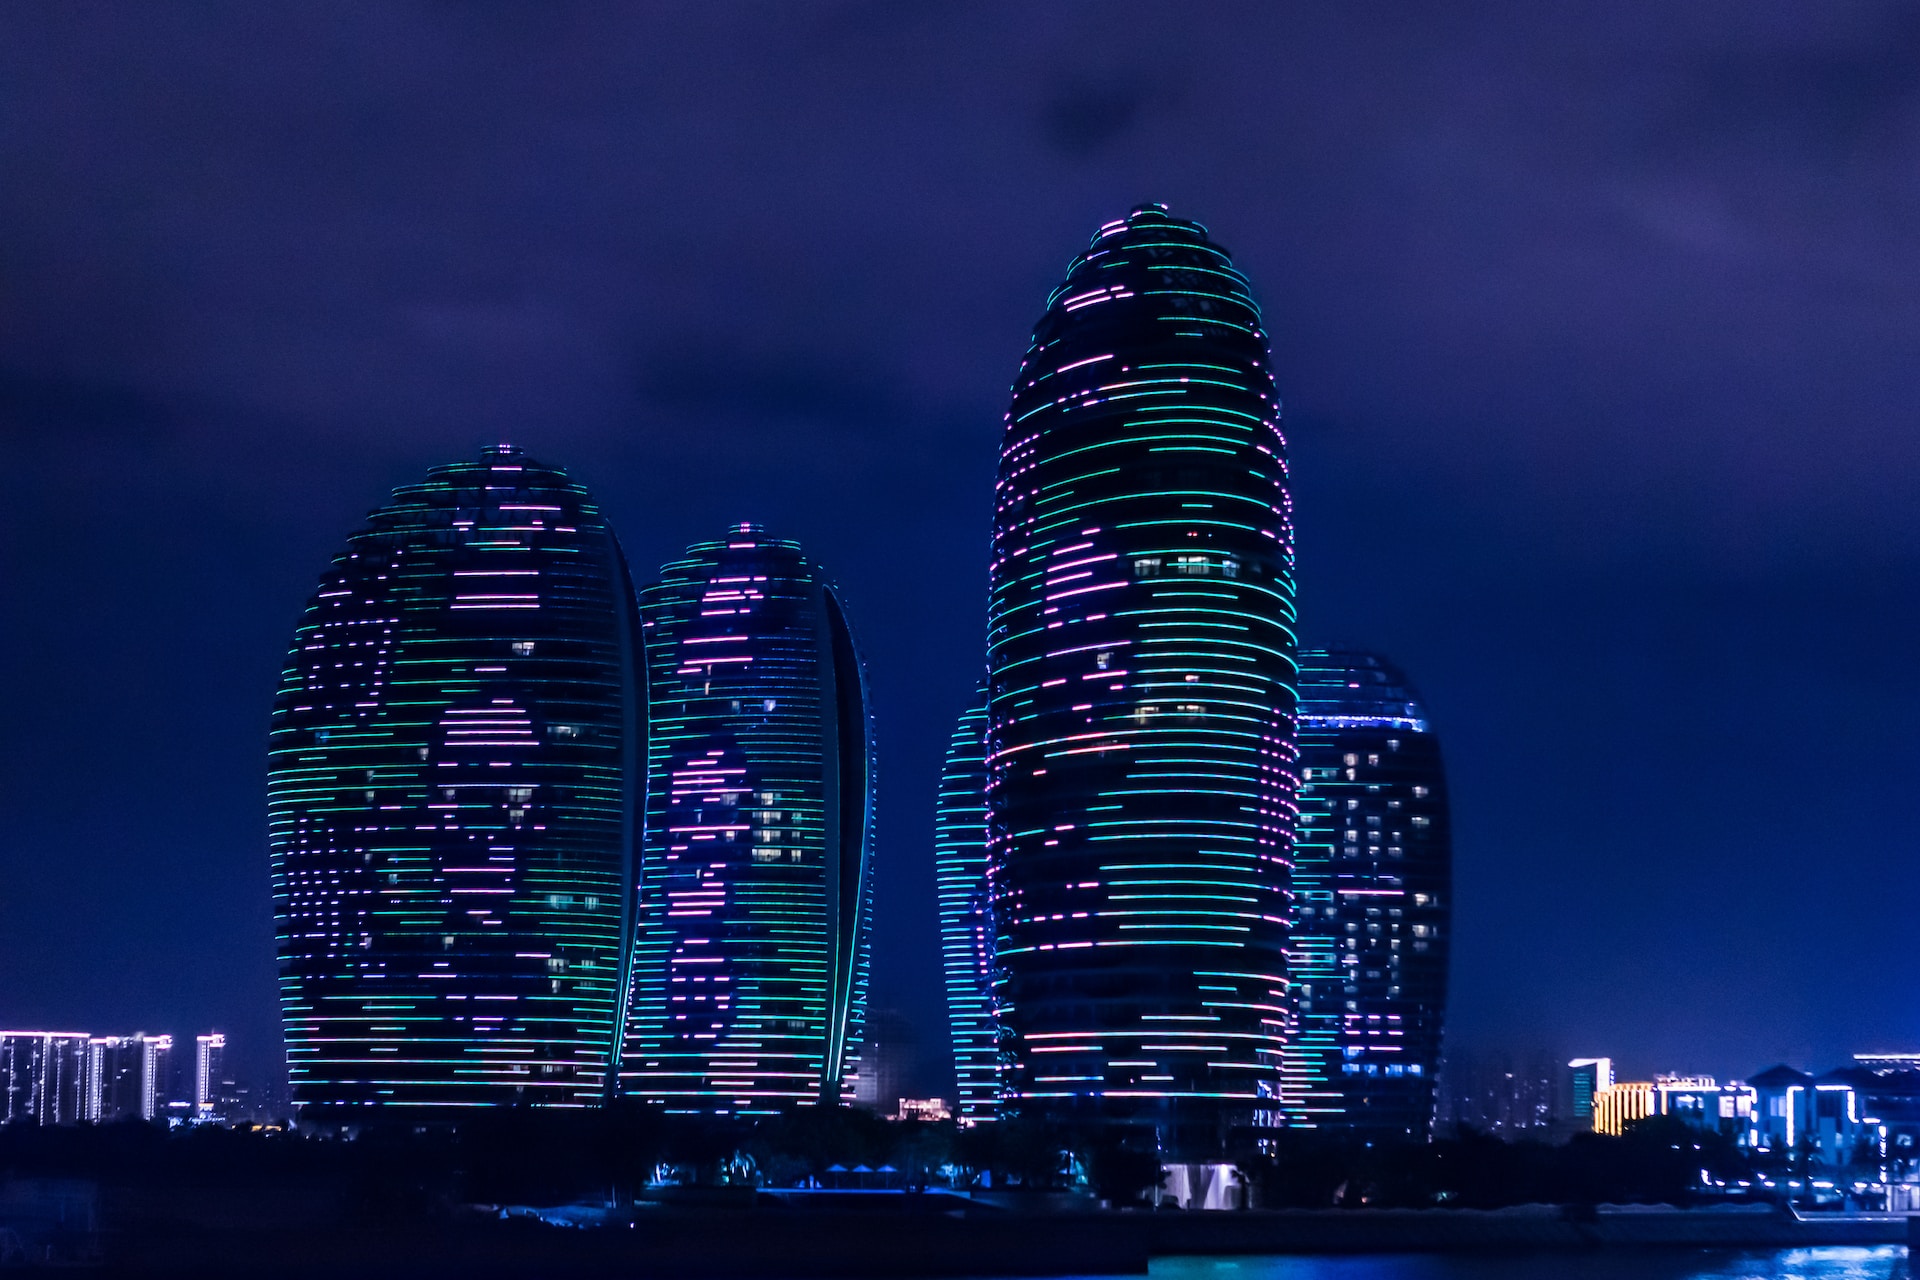 A futuristic city, with glowing skyscrapers